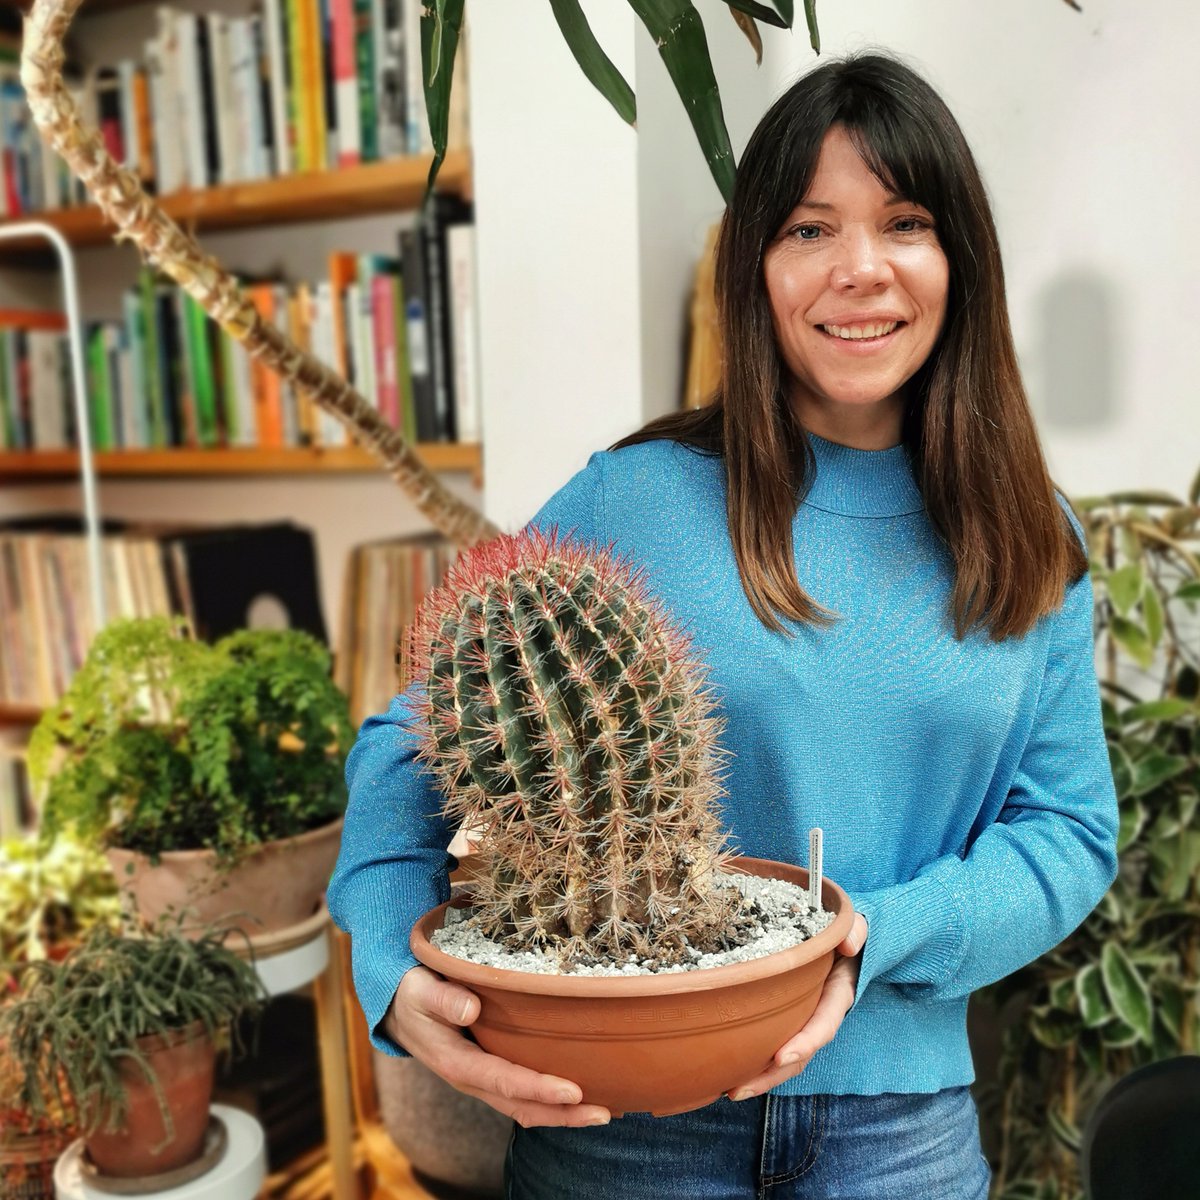 📢 Calling all houseplant lovers! Did you see Sarah Gerrard-Jones (aka The Plant Rescuer) on our show last night? If not, have a watch on @BBCiPlayer when you get a minute, or TONIGHT at 8pm on @BBCTwo if you're in Wales. You'll be inspired 🙂 #GardenersWorld #IndoorGarden